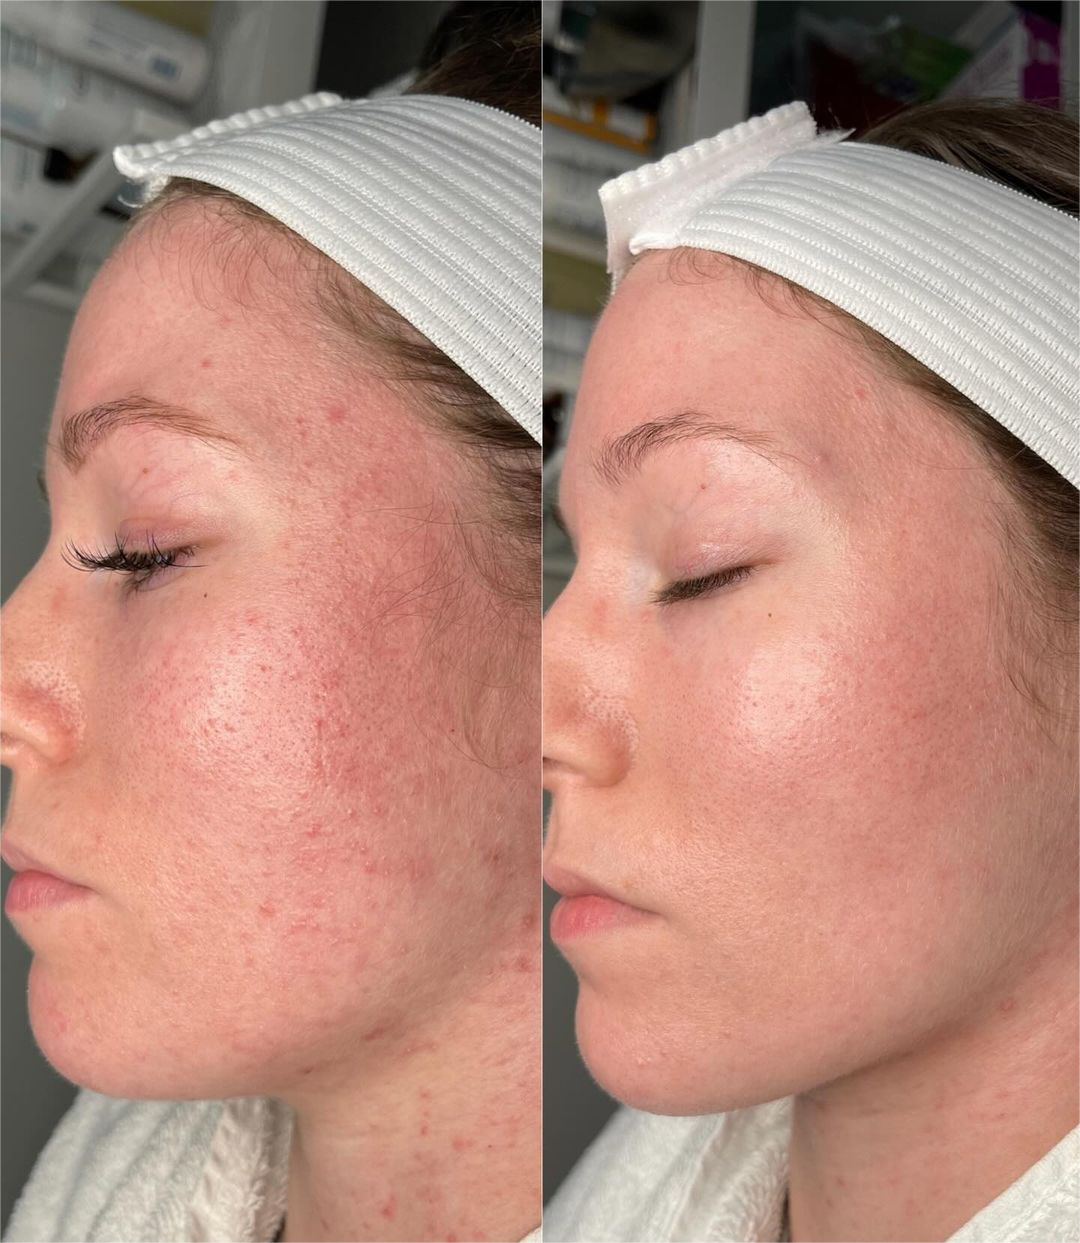 Acne treatment before and after comparison